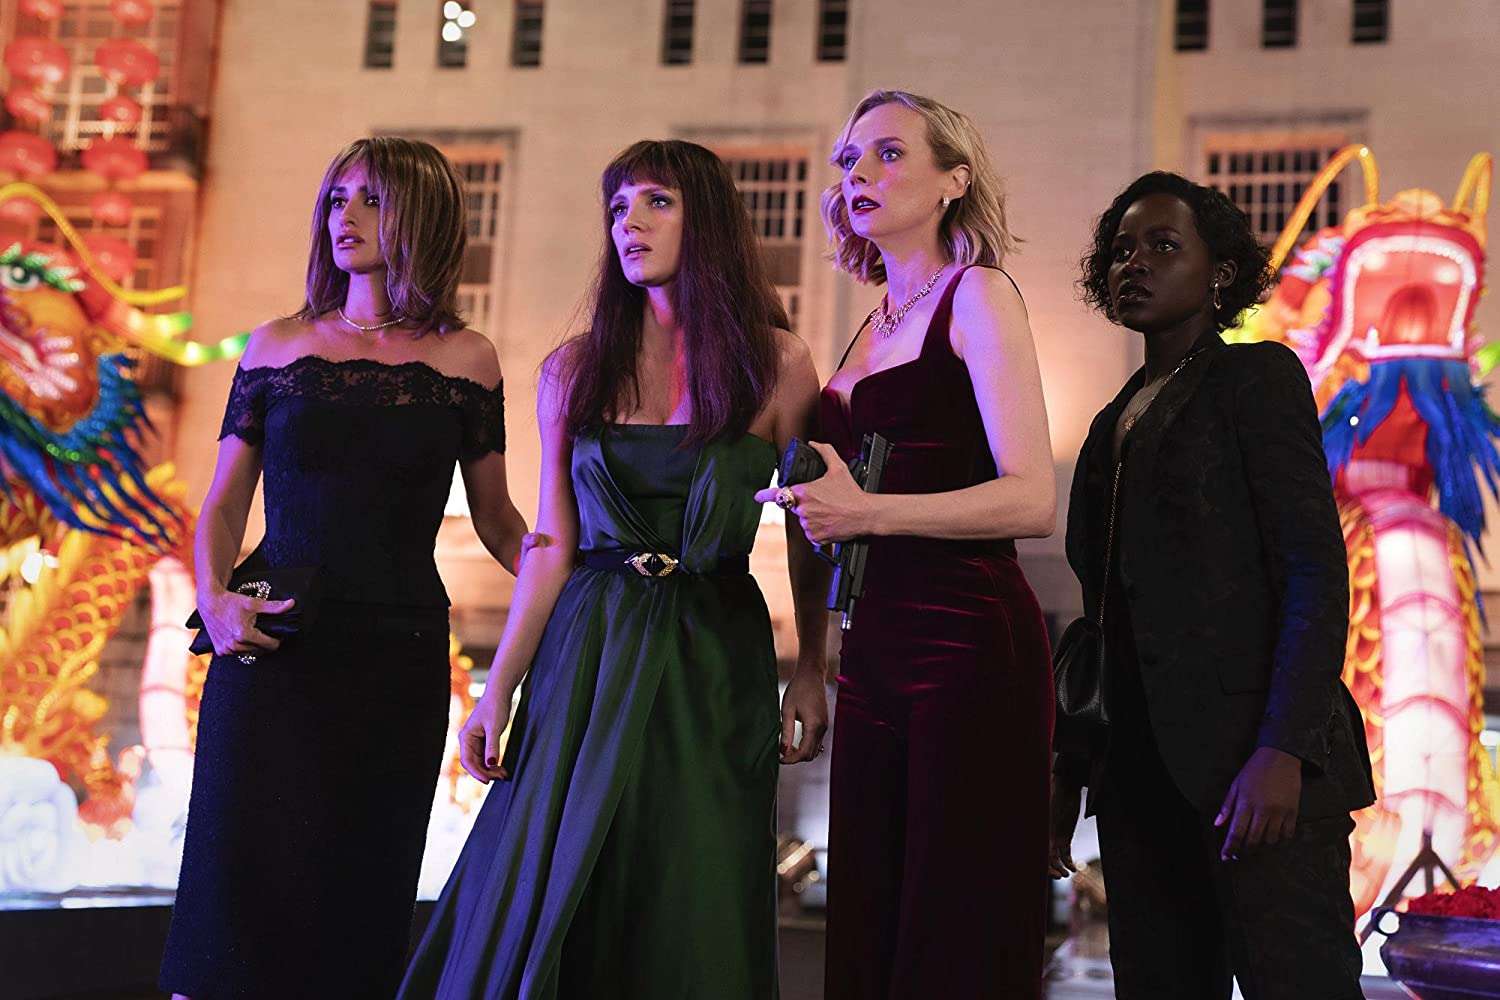 THE 355 Cast Interview  Jessica Chastain, Penélope Cruz and Diane Kruger  Talk New Spy Thriller 